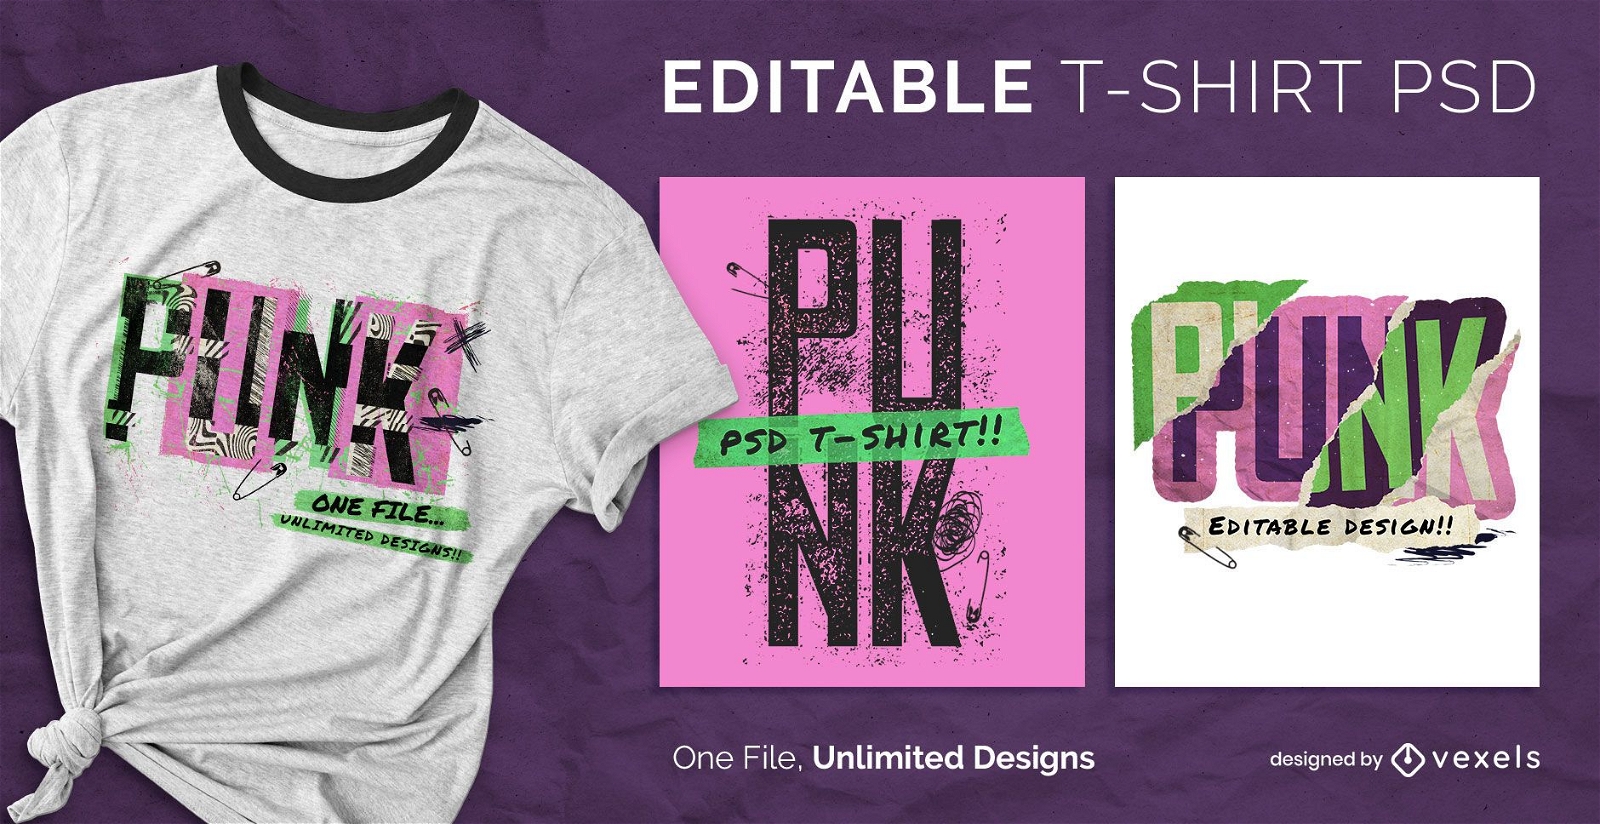 Punk retro style scalable t-shirt psd